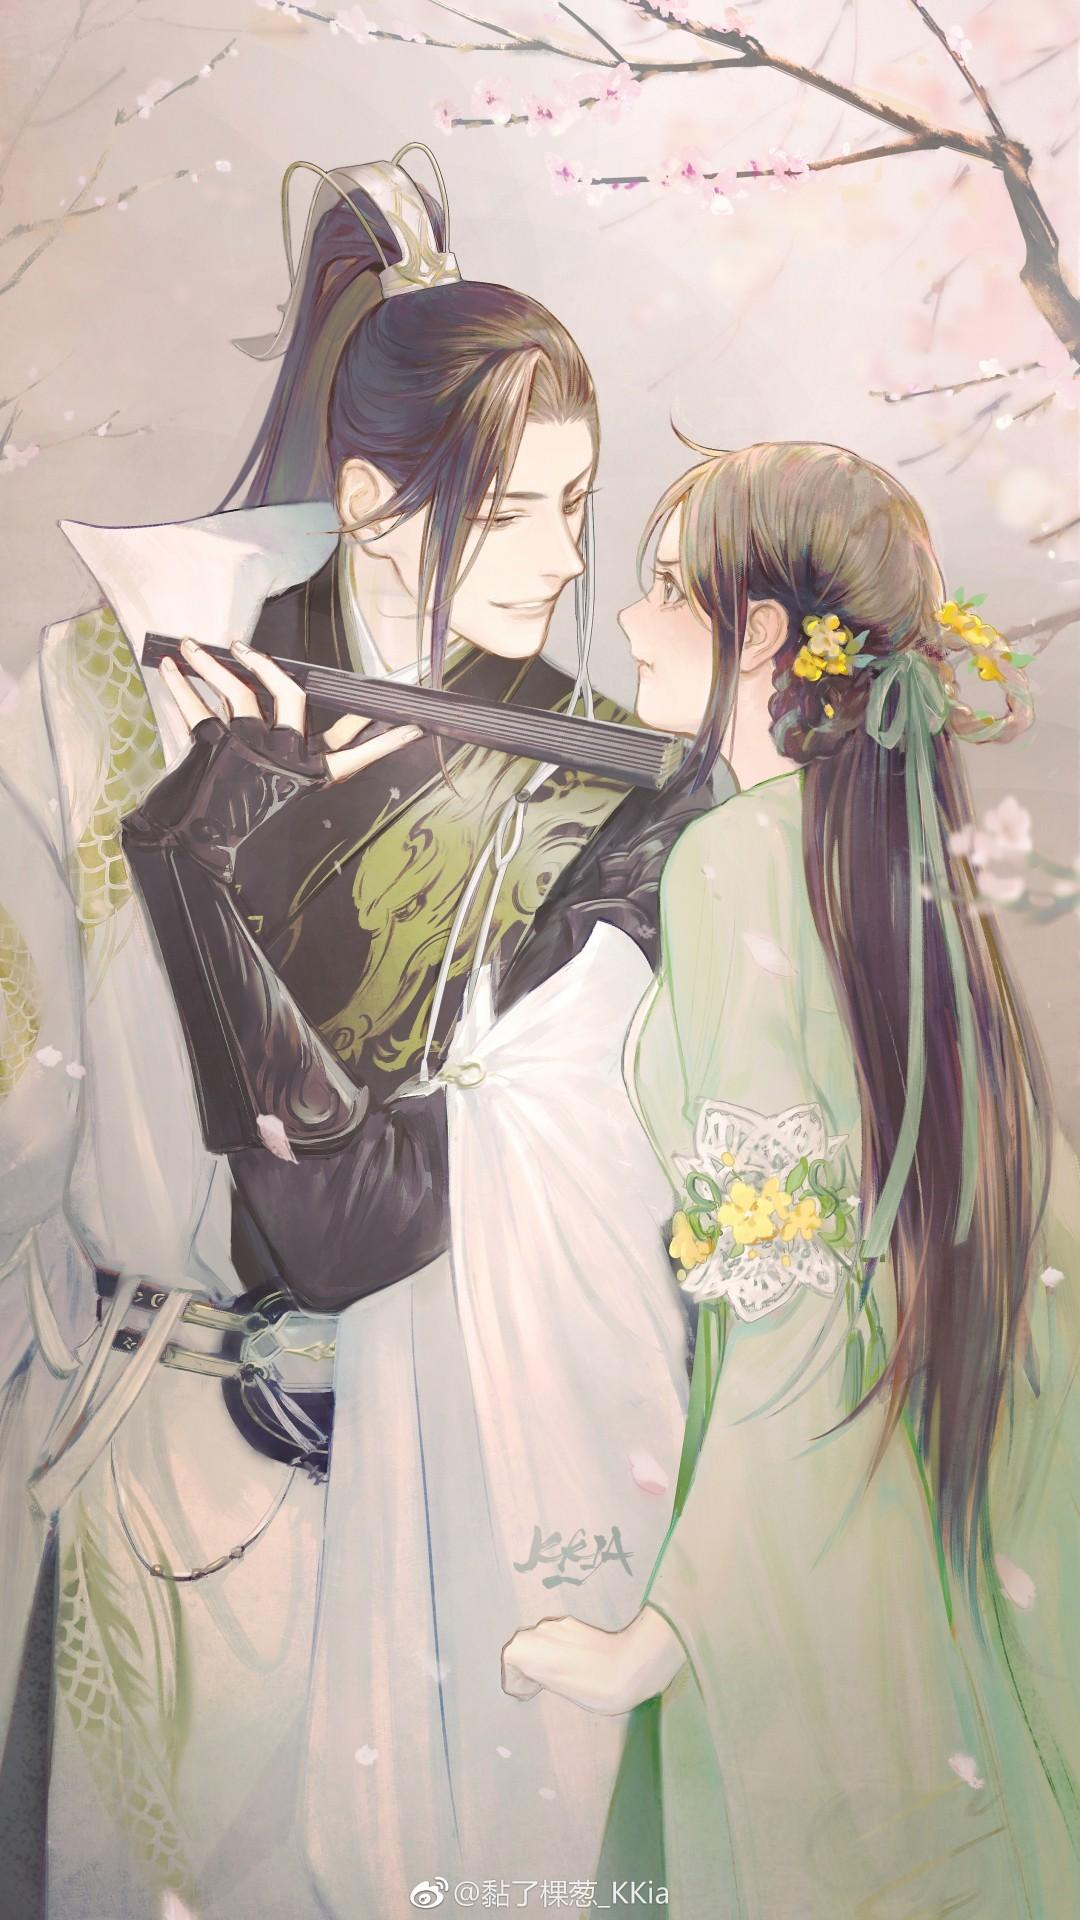 Download 1080x1920 Anime Couple, Romance, Chinese Clothes, Cherry Blossom Wallpaper for iPhone iPhone 7 Plus, iPhone 6+, Sony Xperia Z, HTC One